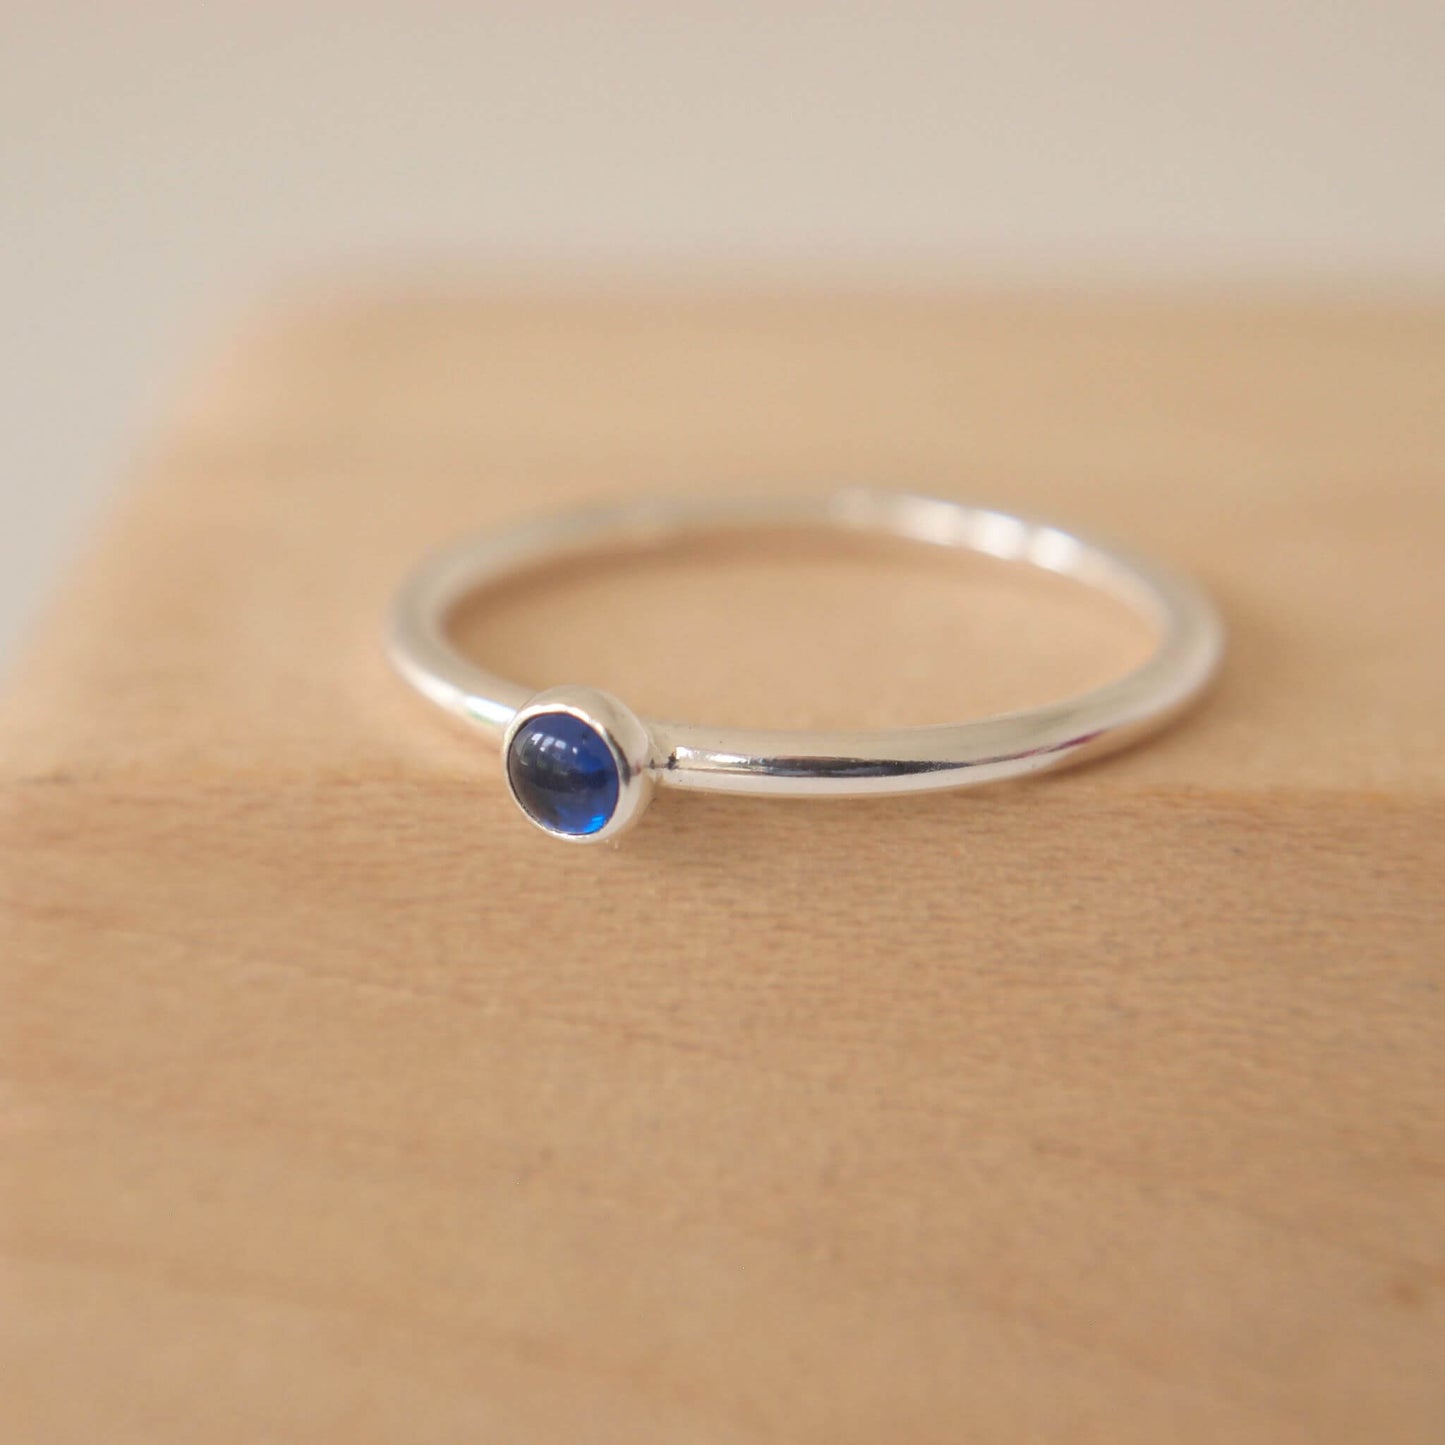 Silver and Lab Sapphire ring on a modern round halo band with a small gemstone. The gem is a 3mm round cabochon in bright primary blue on a simple sterling silver band. Handmade in Scotland by maram jewellery